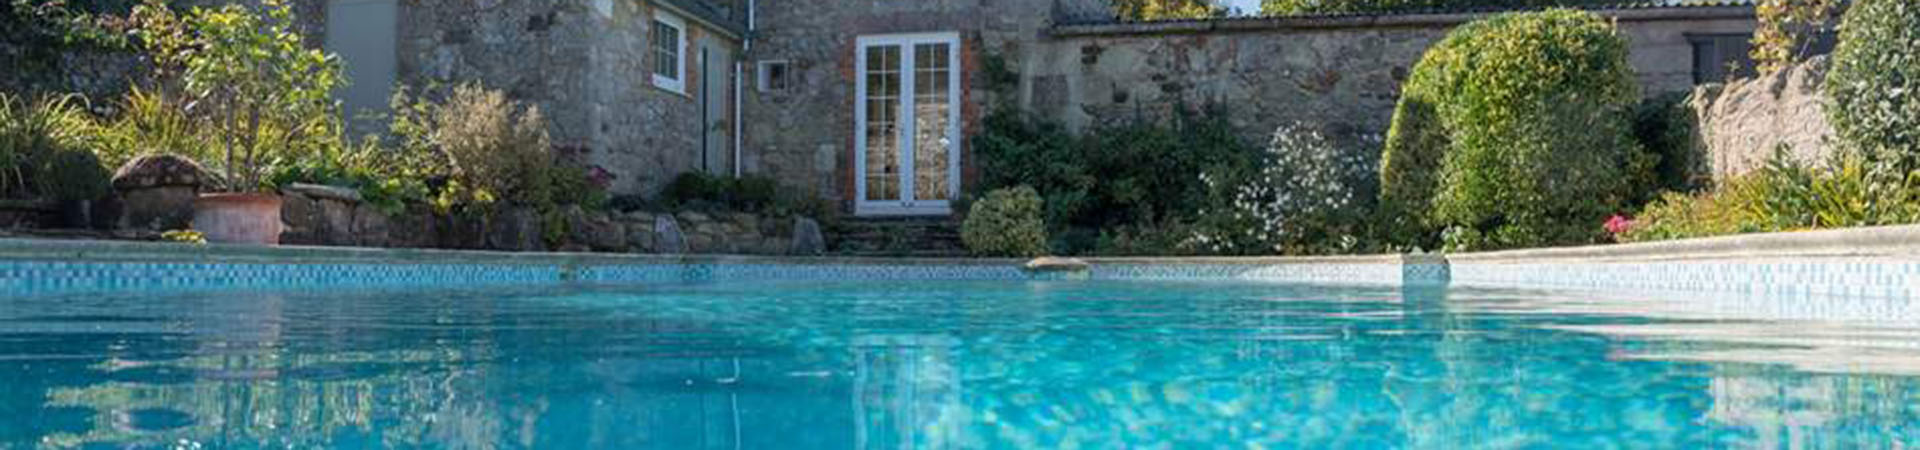 Holiday cottages with pools in Gwynedd